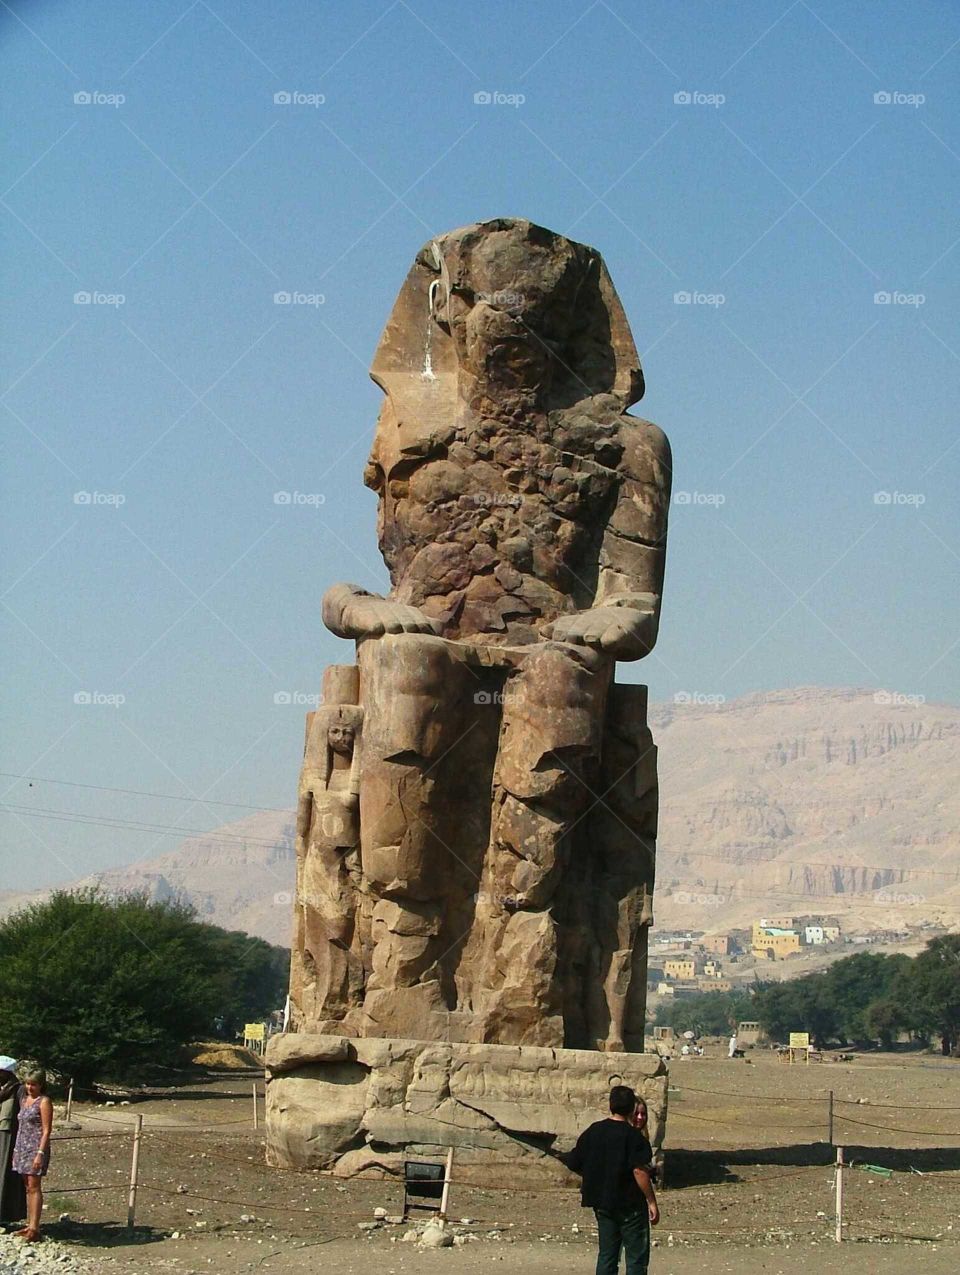 Large Egyptian statue